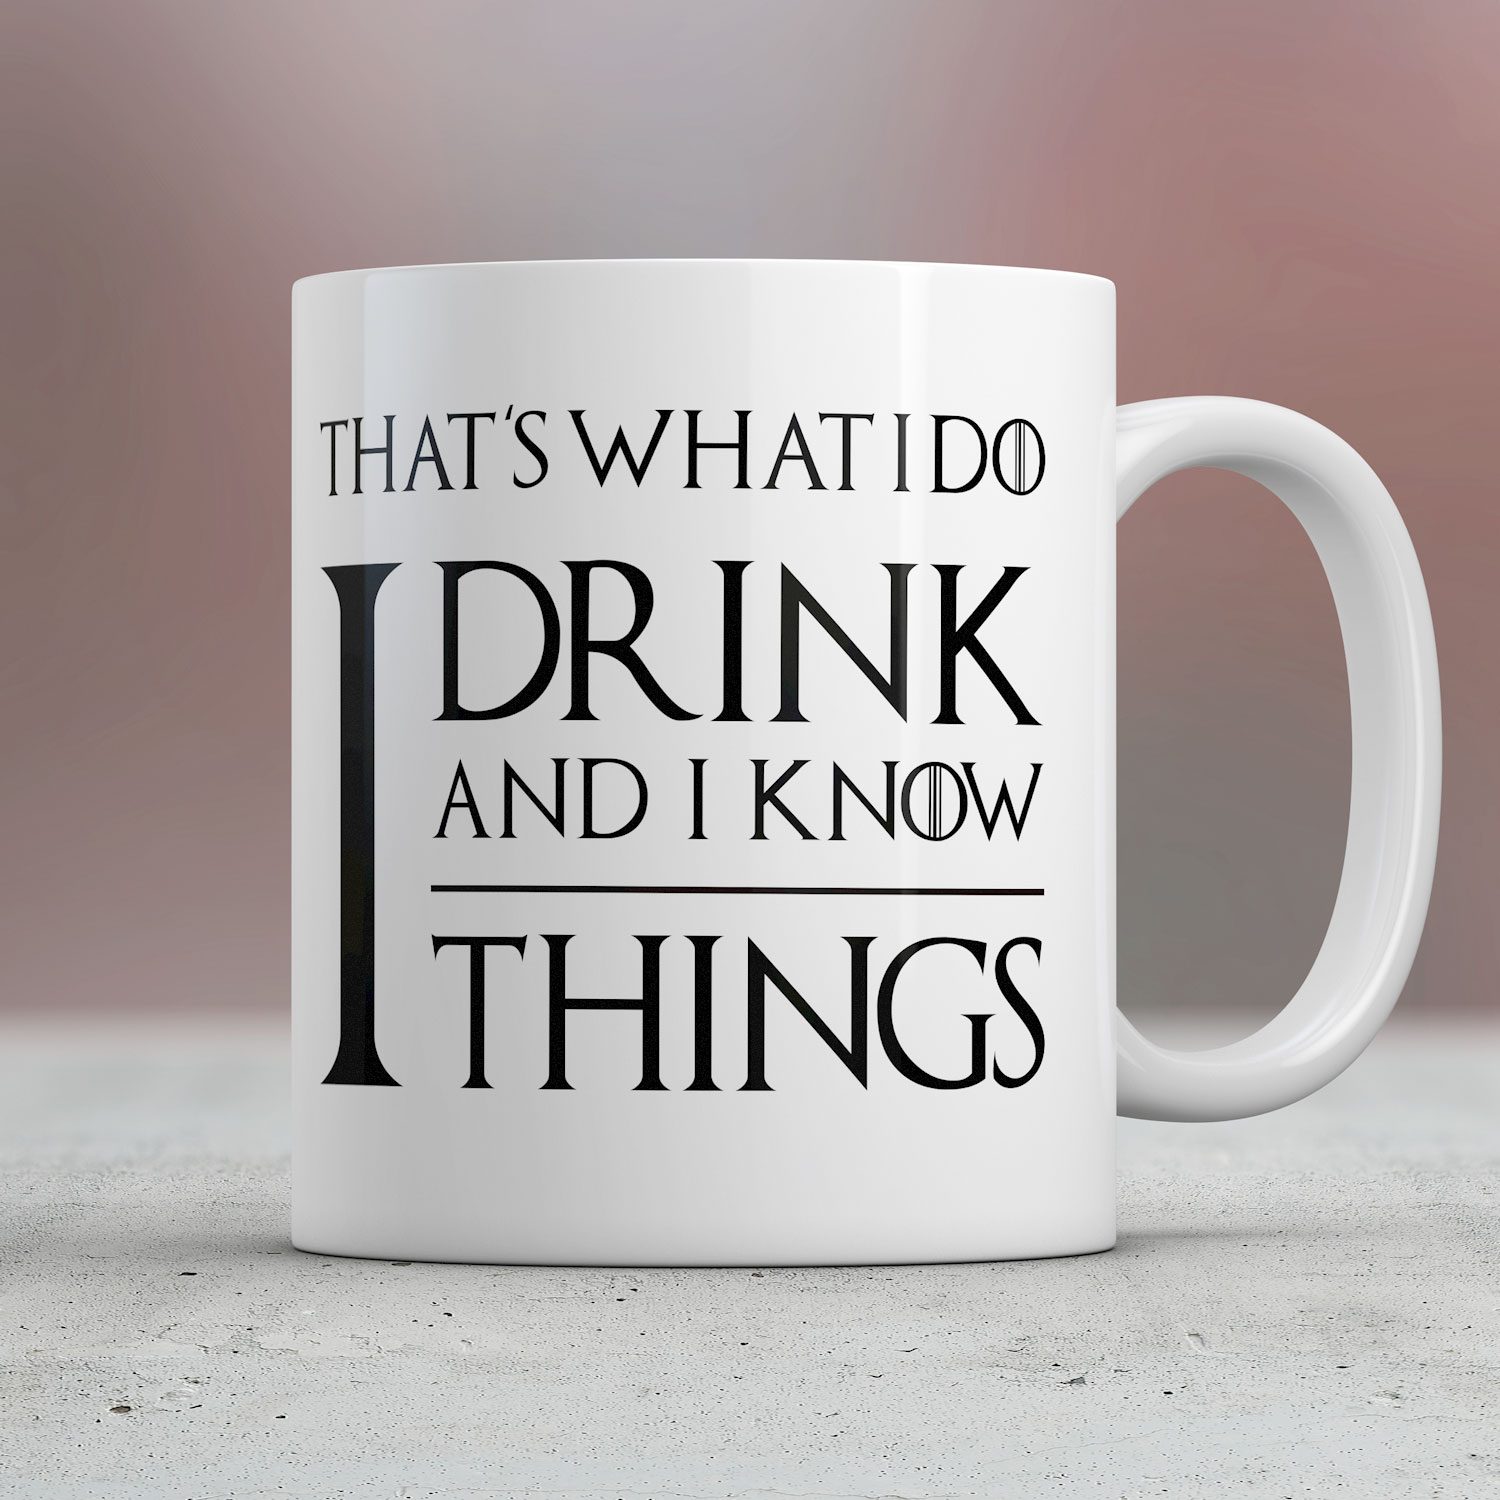 Afbeelding Mok I drink and I know things door Cadeau.nl